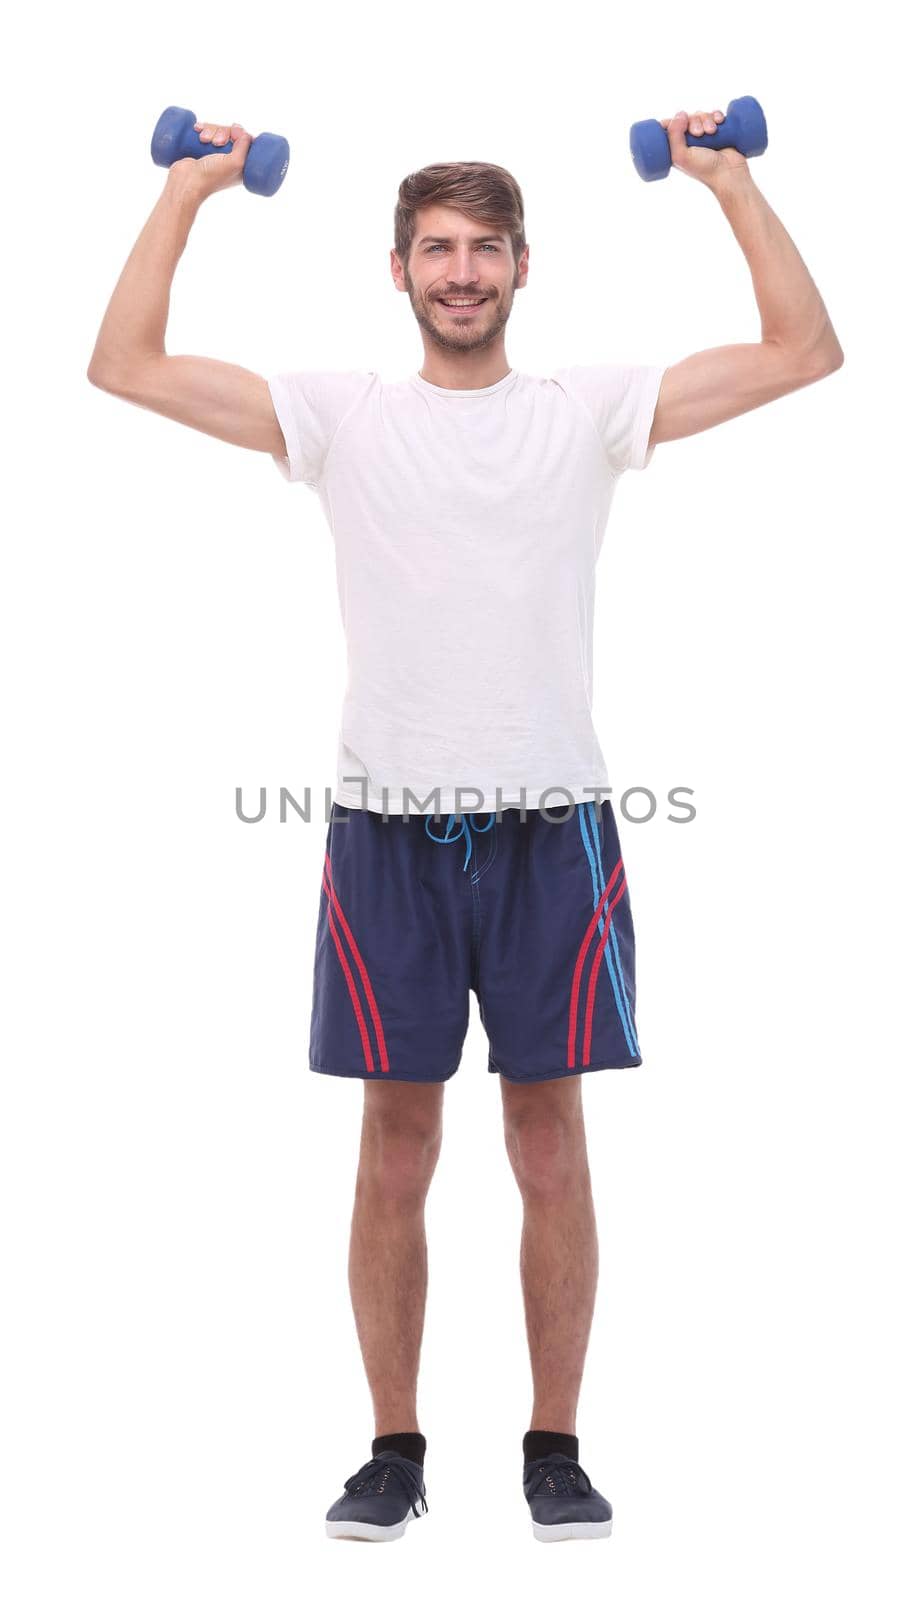 in full growth.young man with dumbbells.isolated on white background